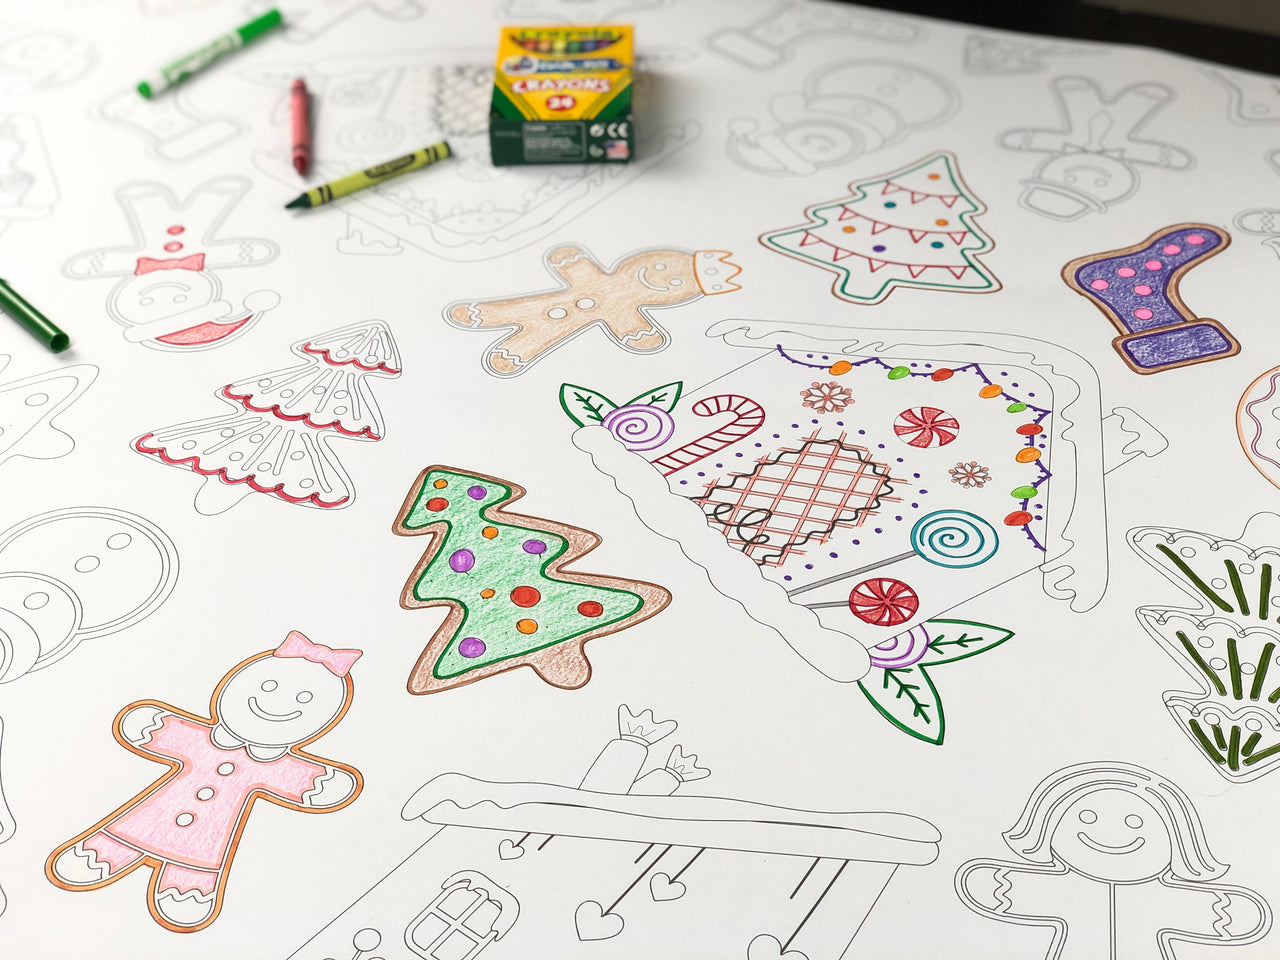 Gingerbread Table Size Coloring Sheet